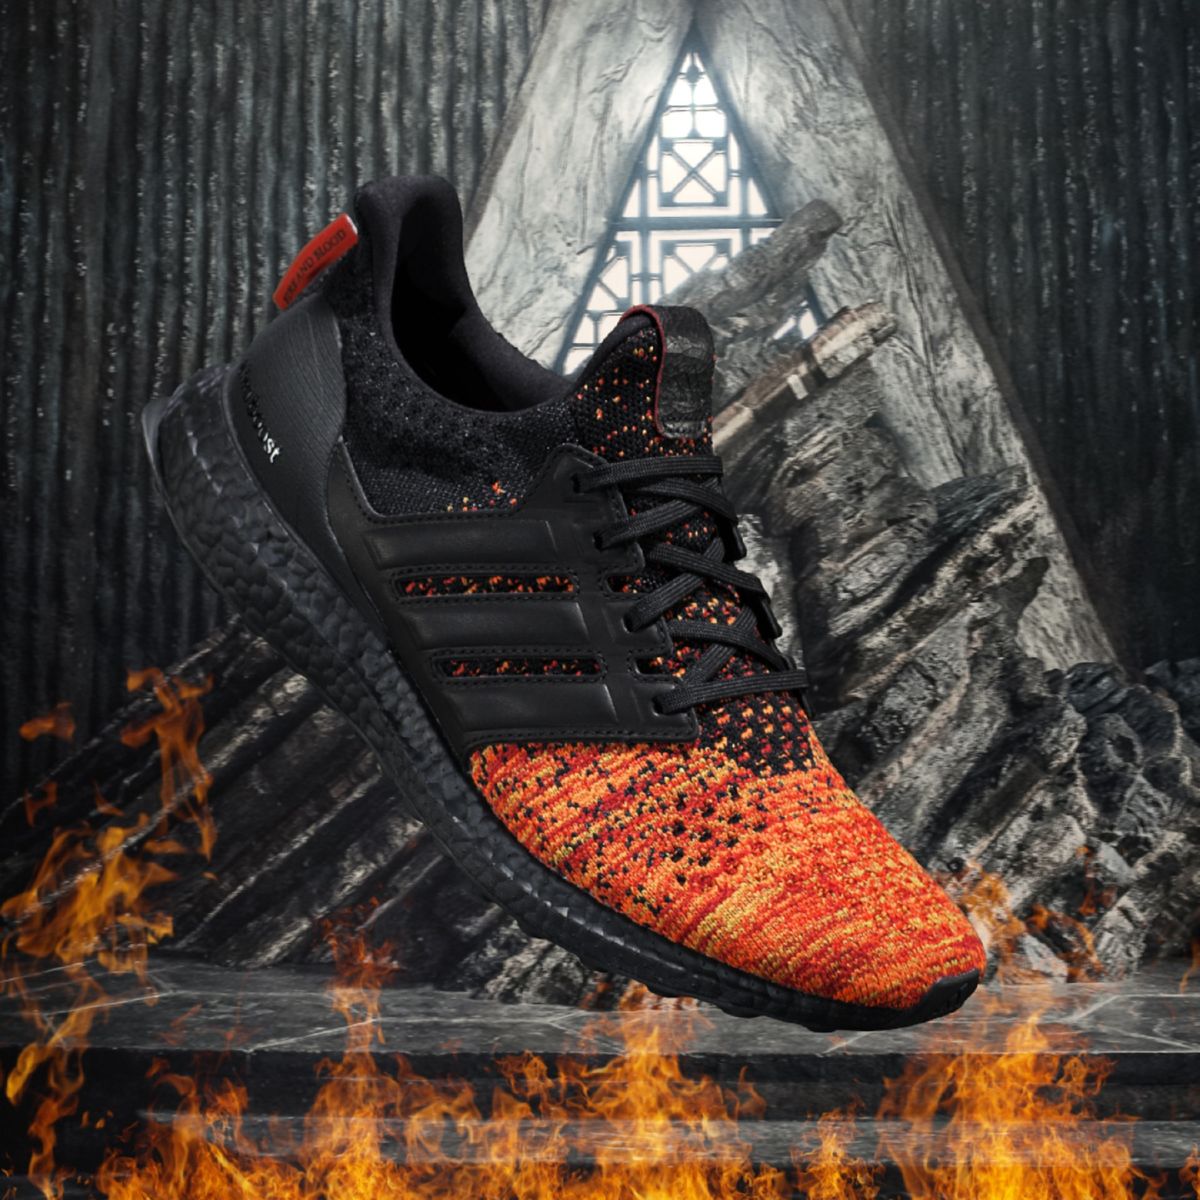 finished constant Junior The 'Game of Thrones' Adidas Ultra Boost Collection Finally Makes Its Debut